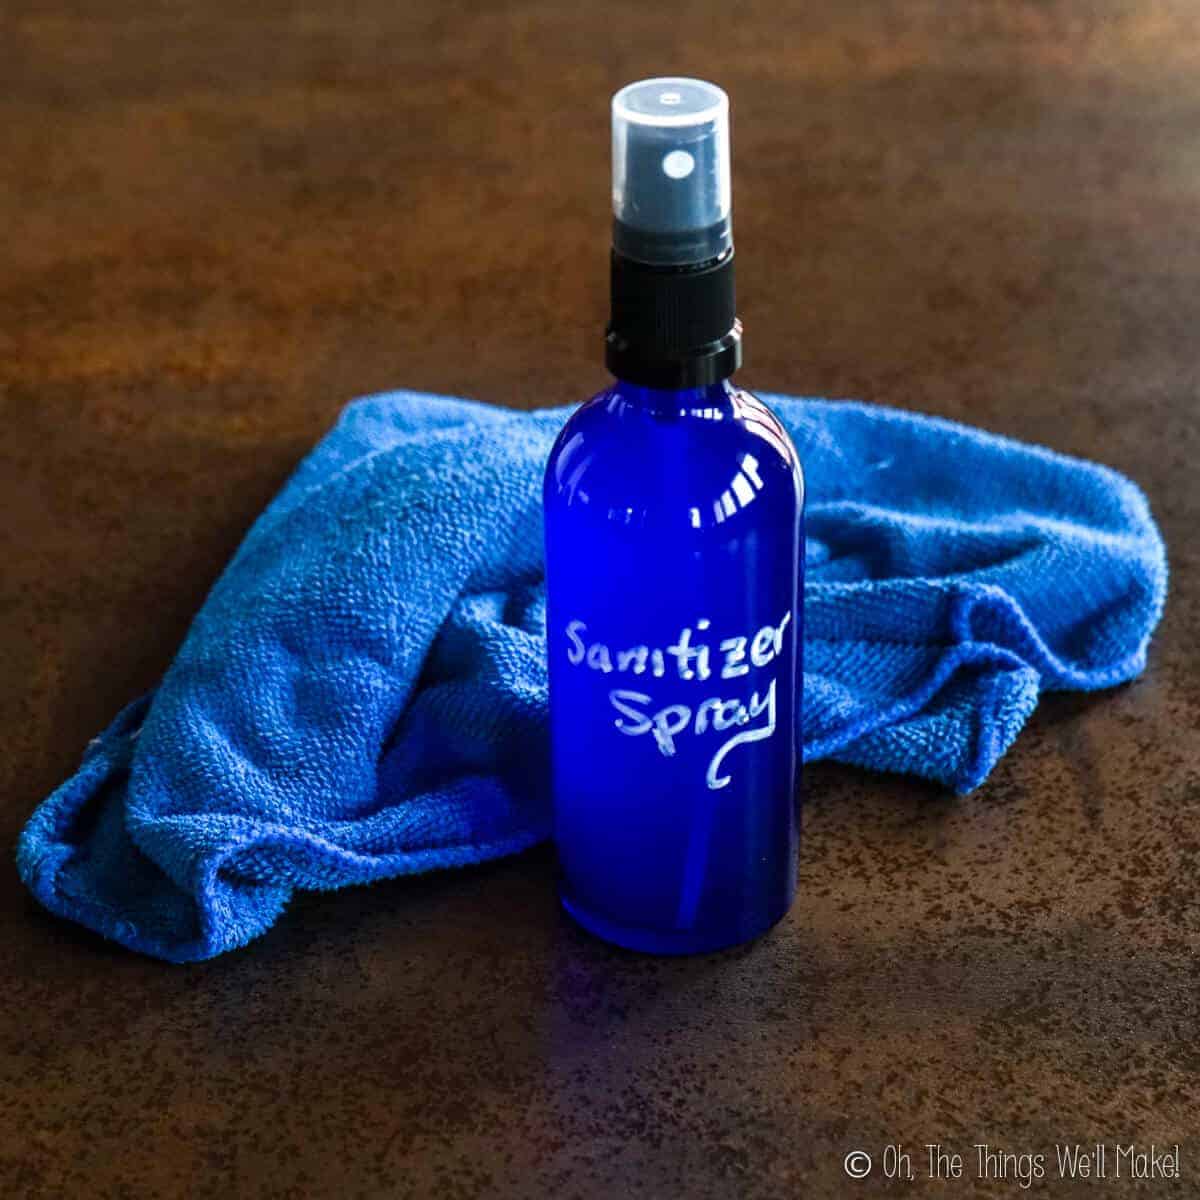 A blue glass bottle filled with a homemade disinfectant spray in front of a blue rag.